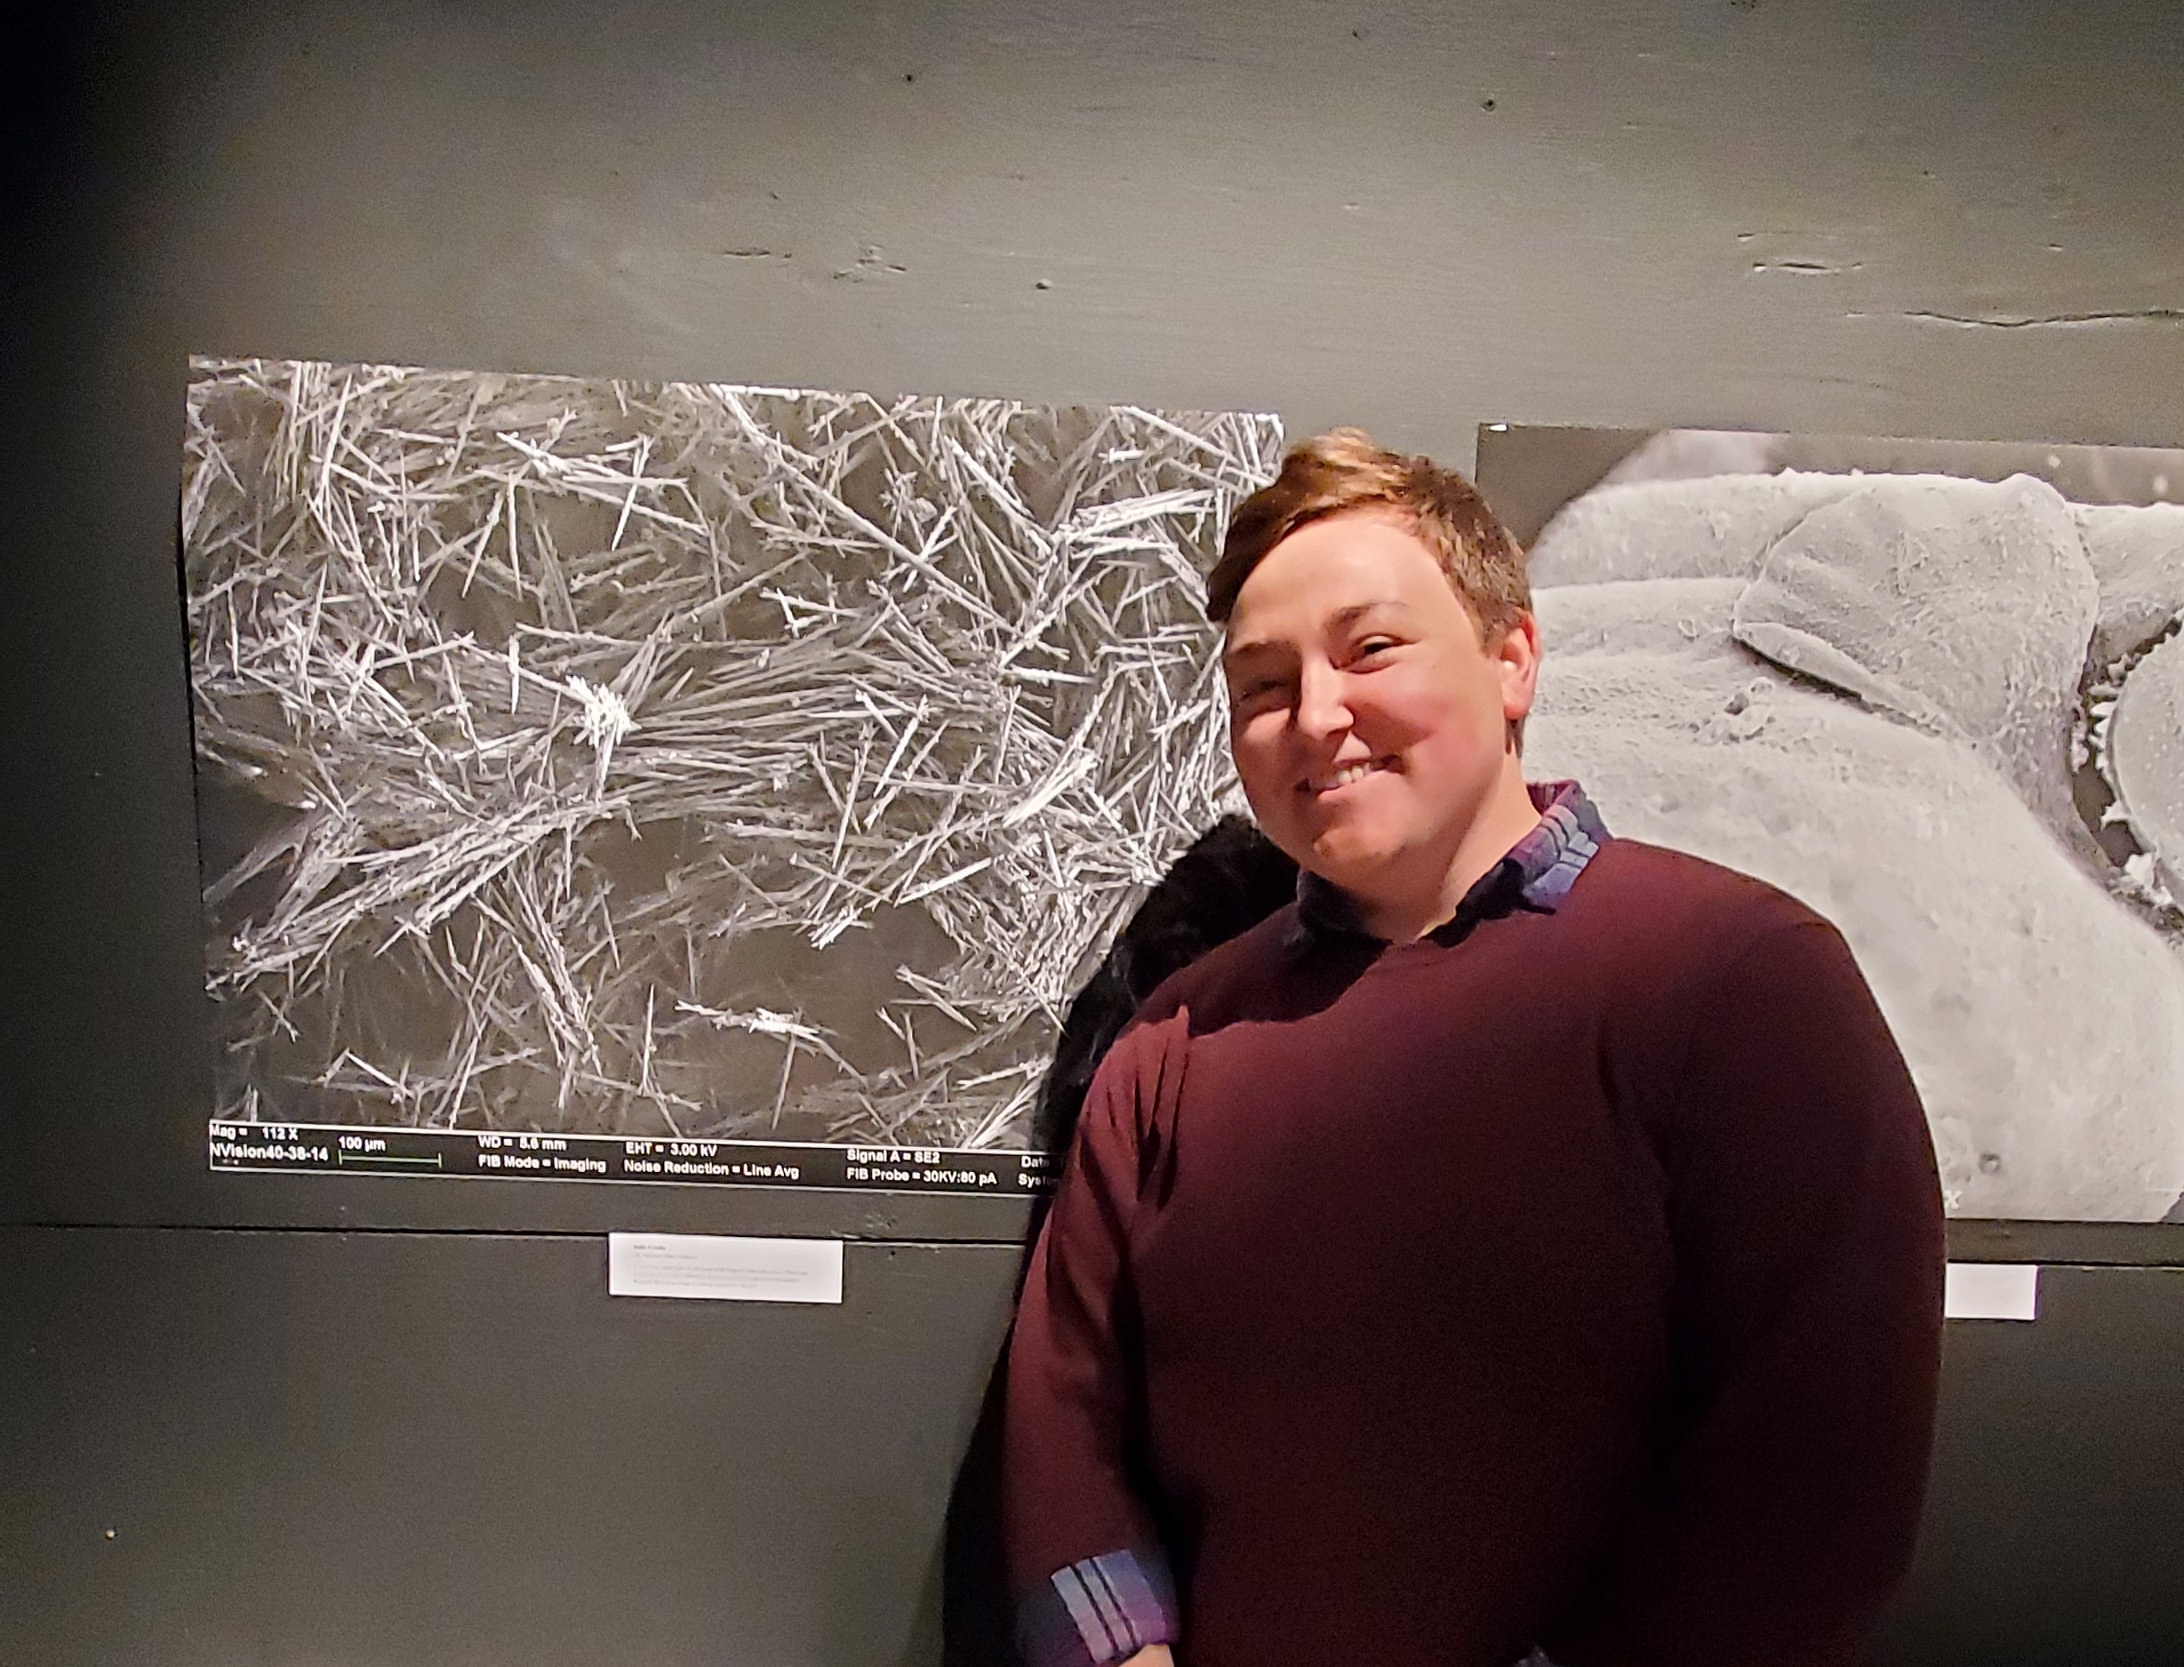 School of Biology and Ecology student Sadia Crosby stands to the right of a large print. The print is a highly-magnified image of browntail moth hairs.